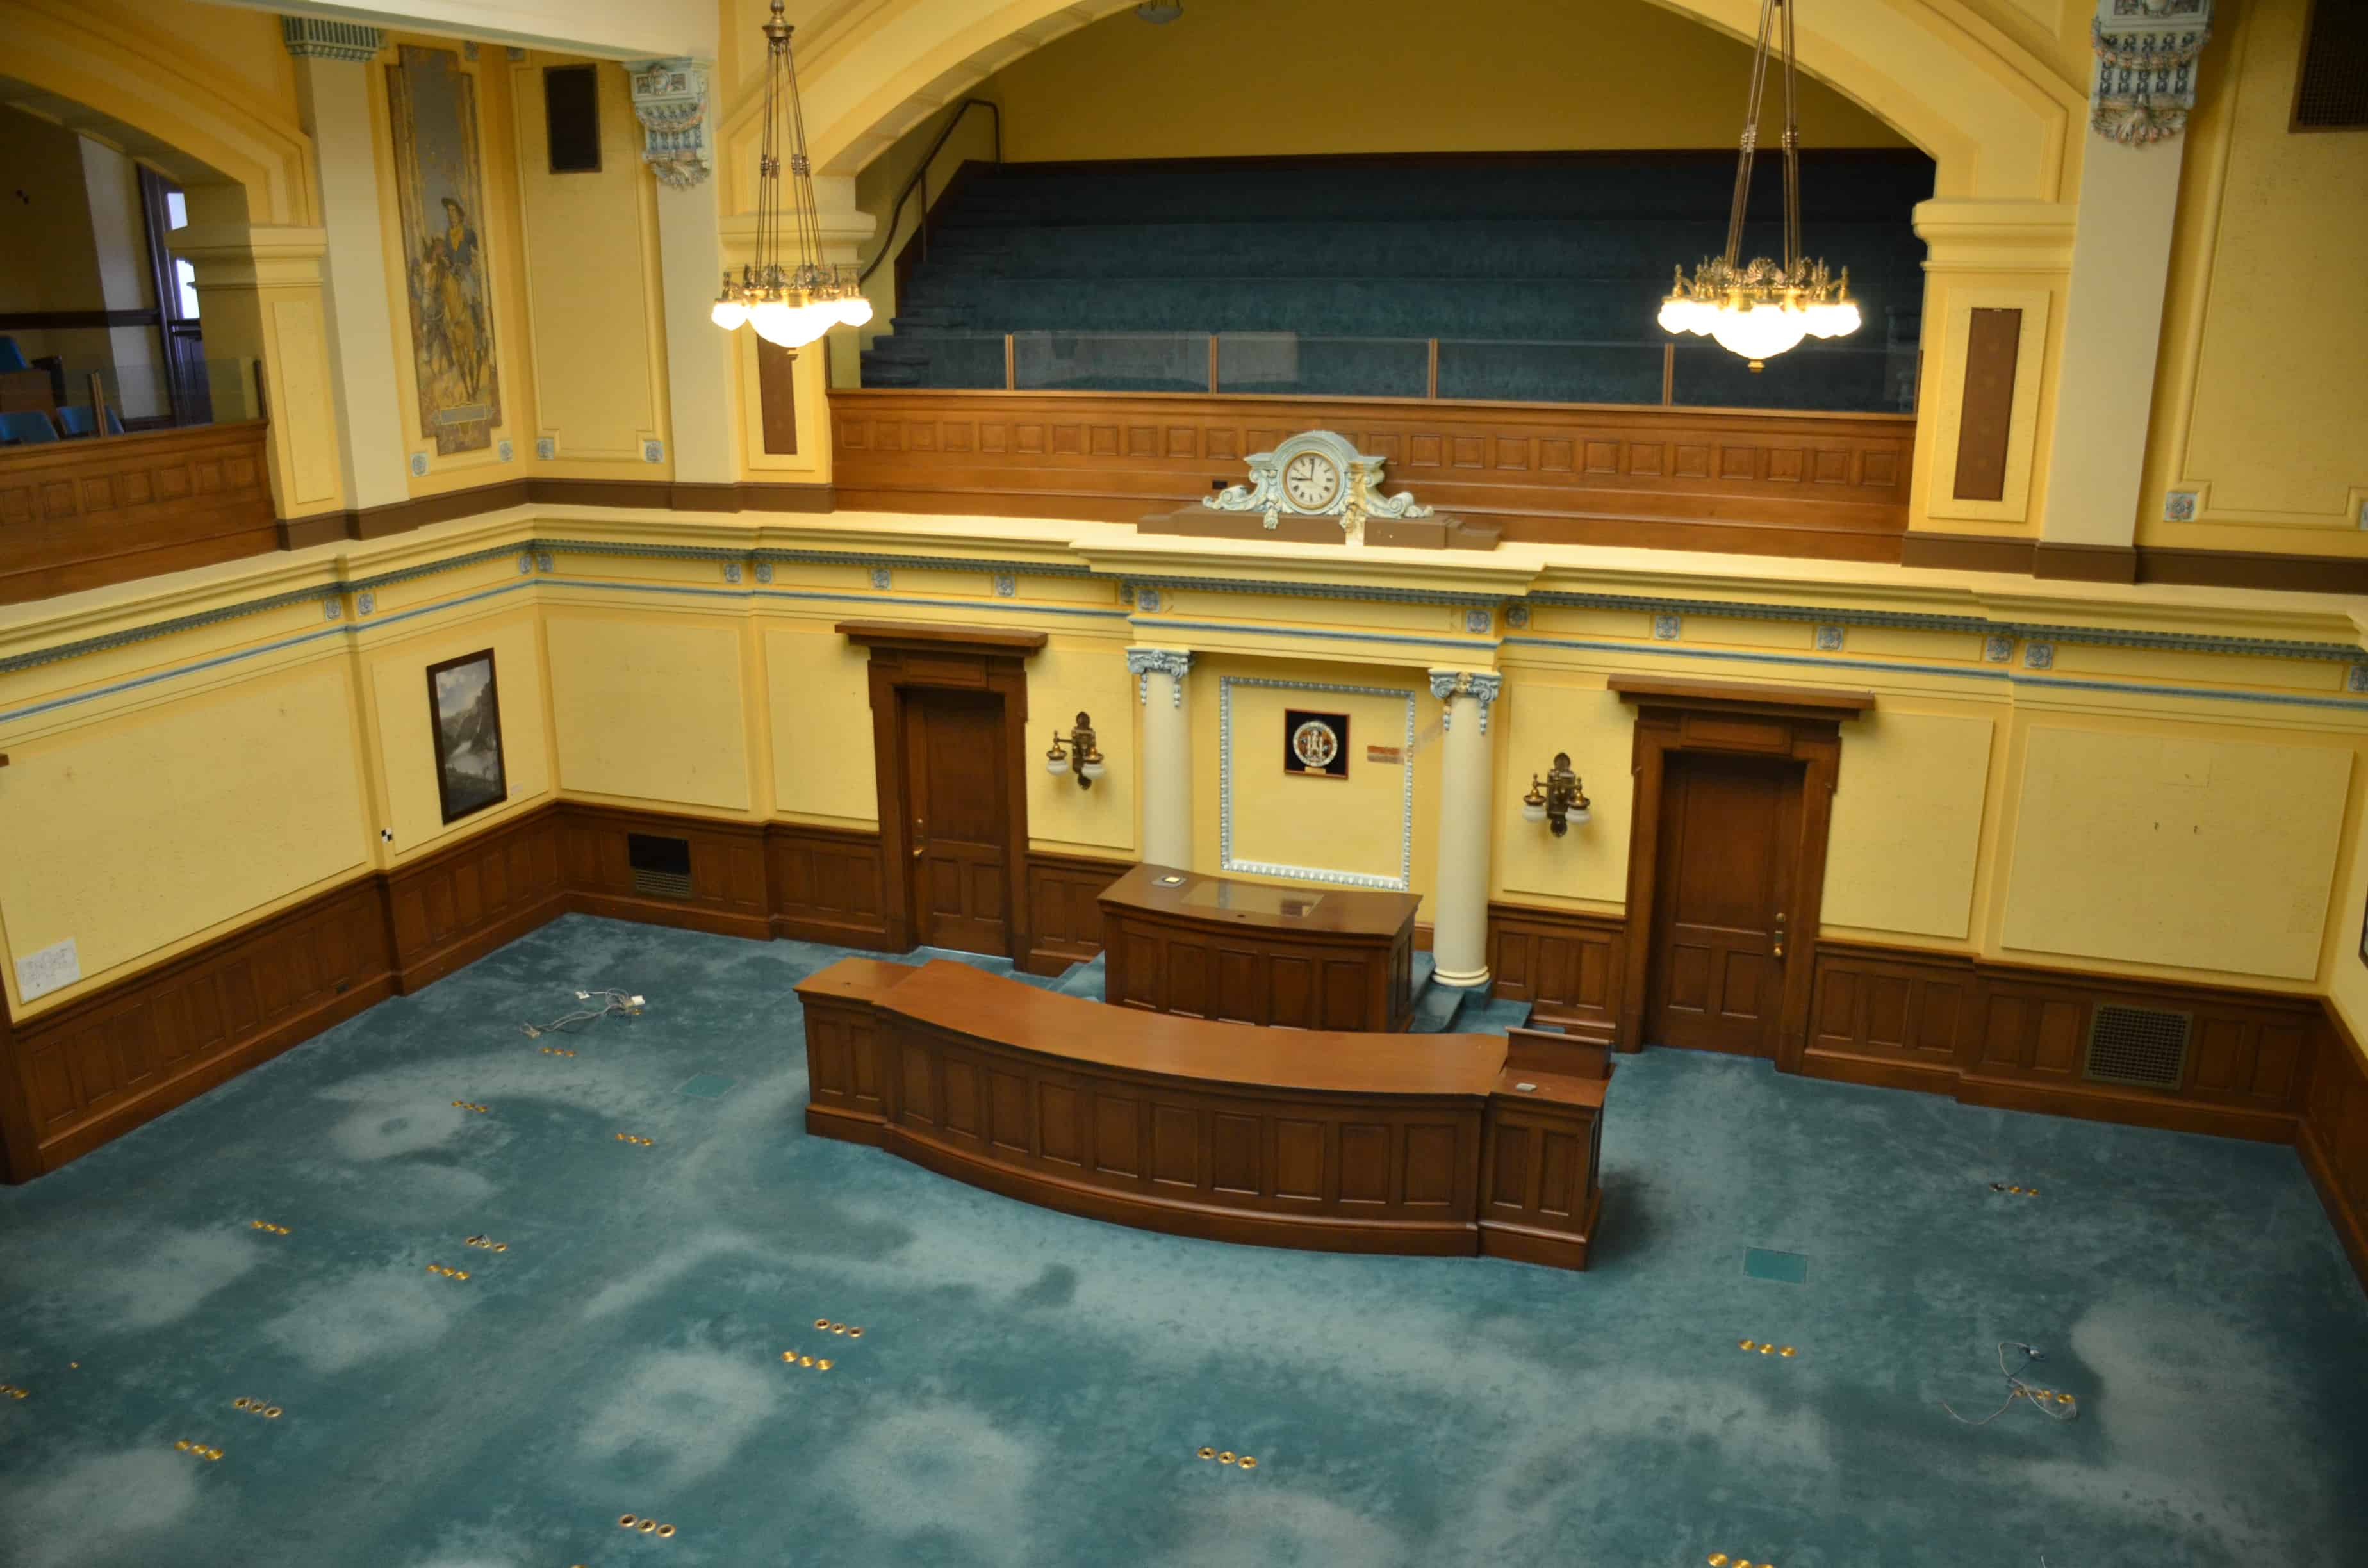 Senate Chamber at the Wyoming State Capitol in Cheyenne